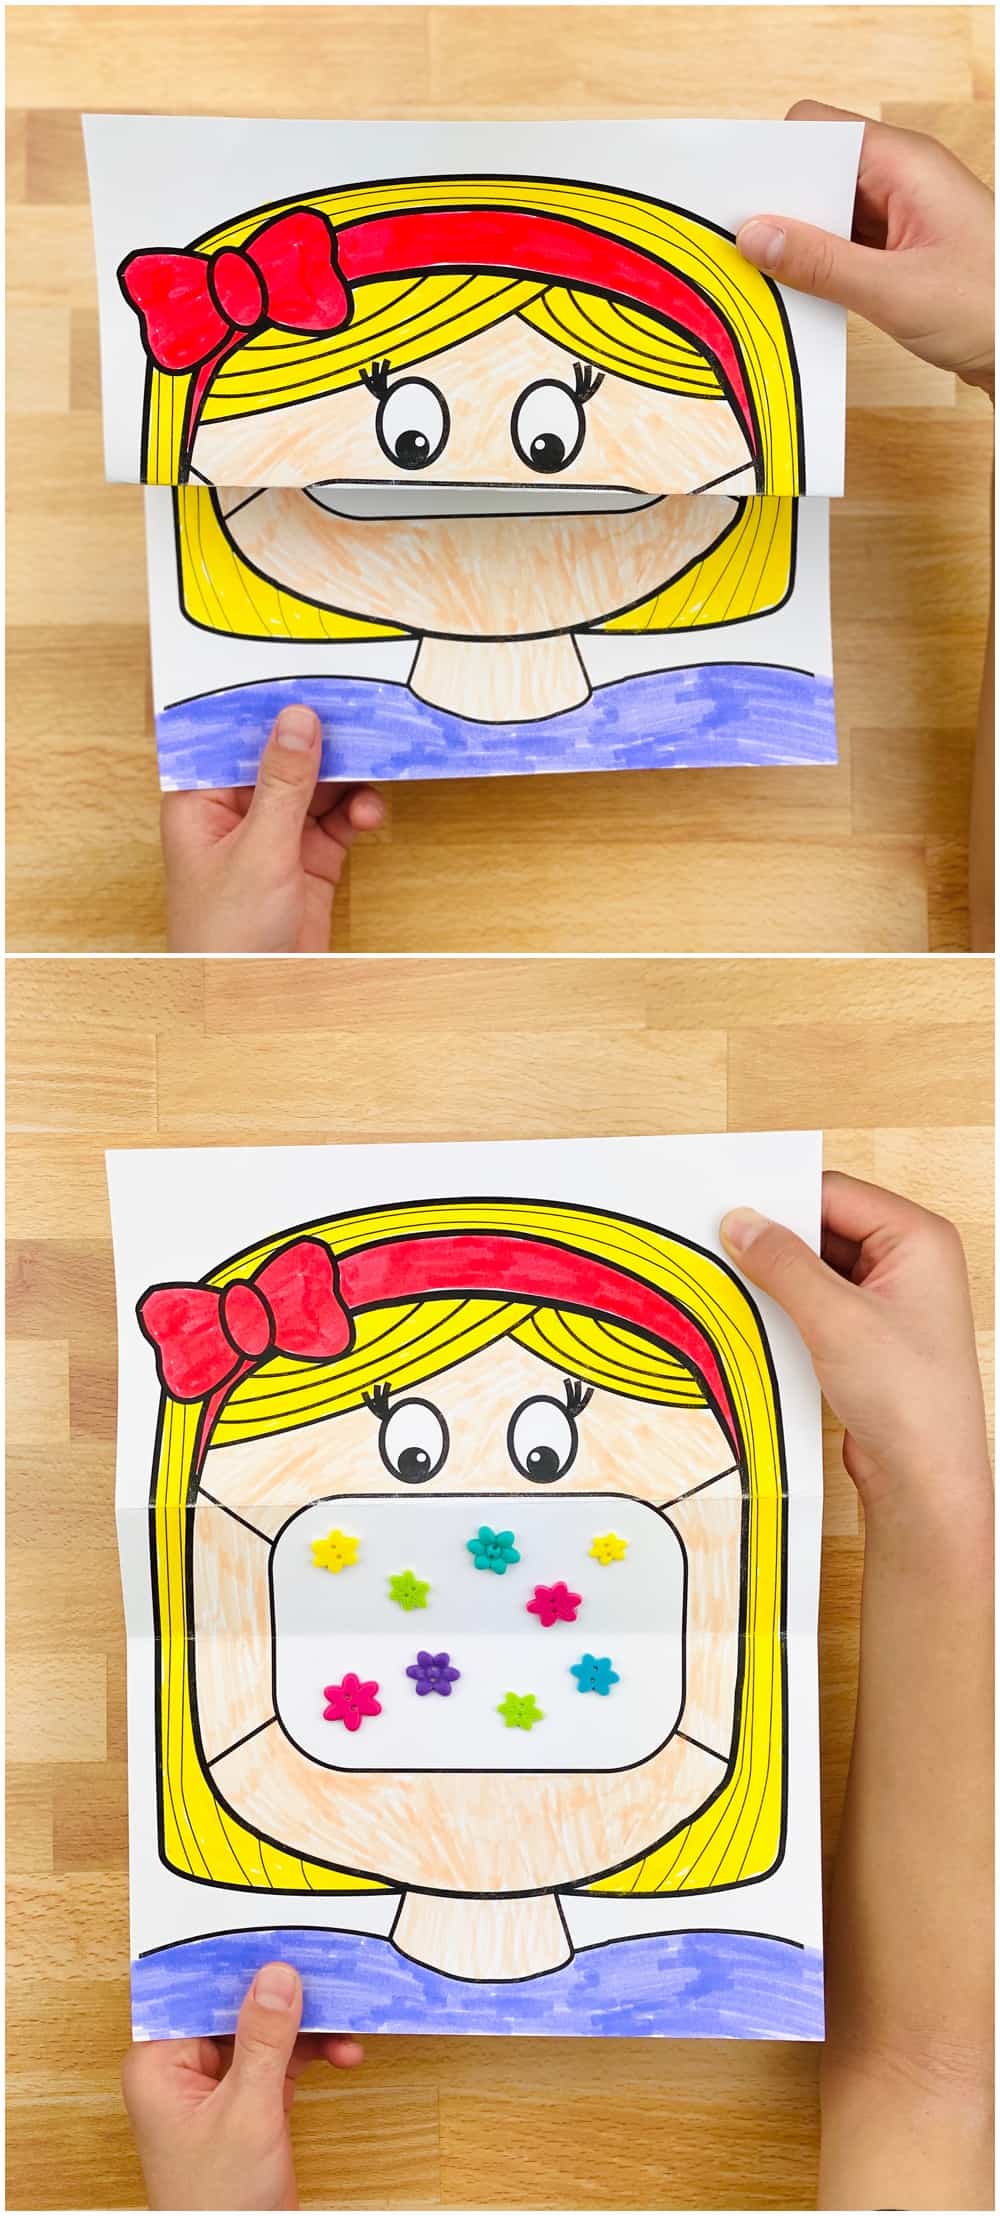 coloring art project for kids, filling in mask to decorate 